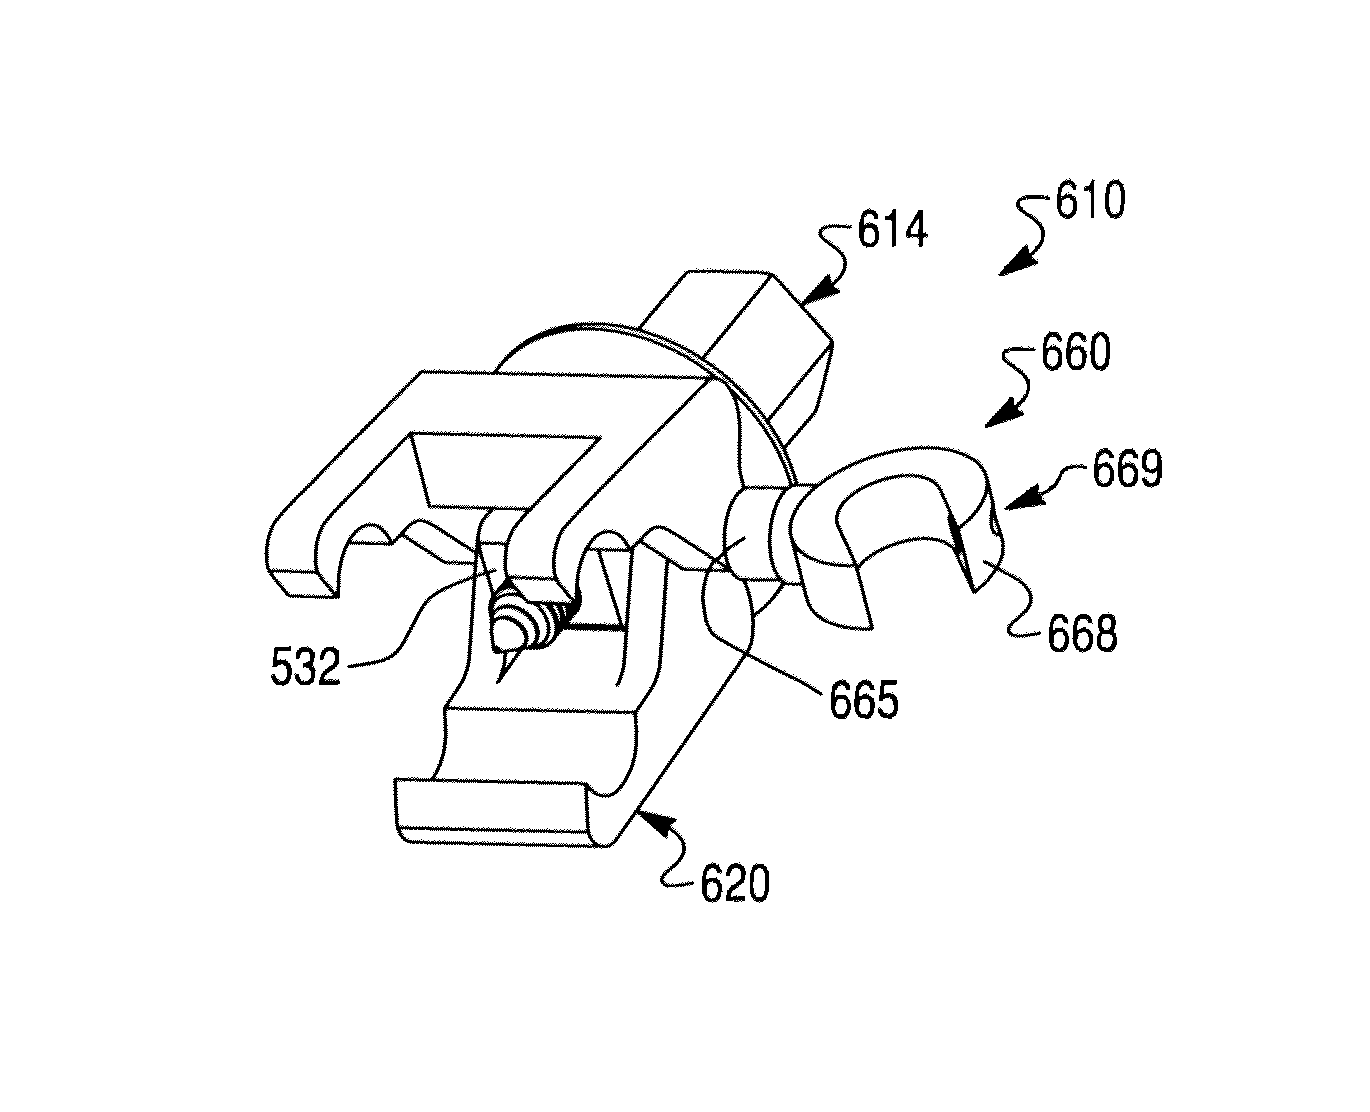 Segmental orthopedic device for spinal elongation and for treatment of scoliosis